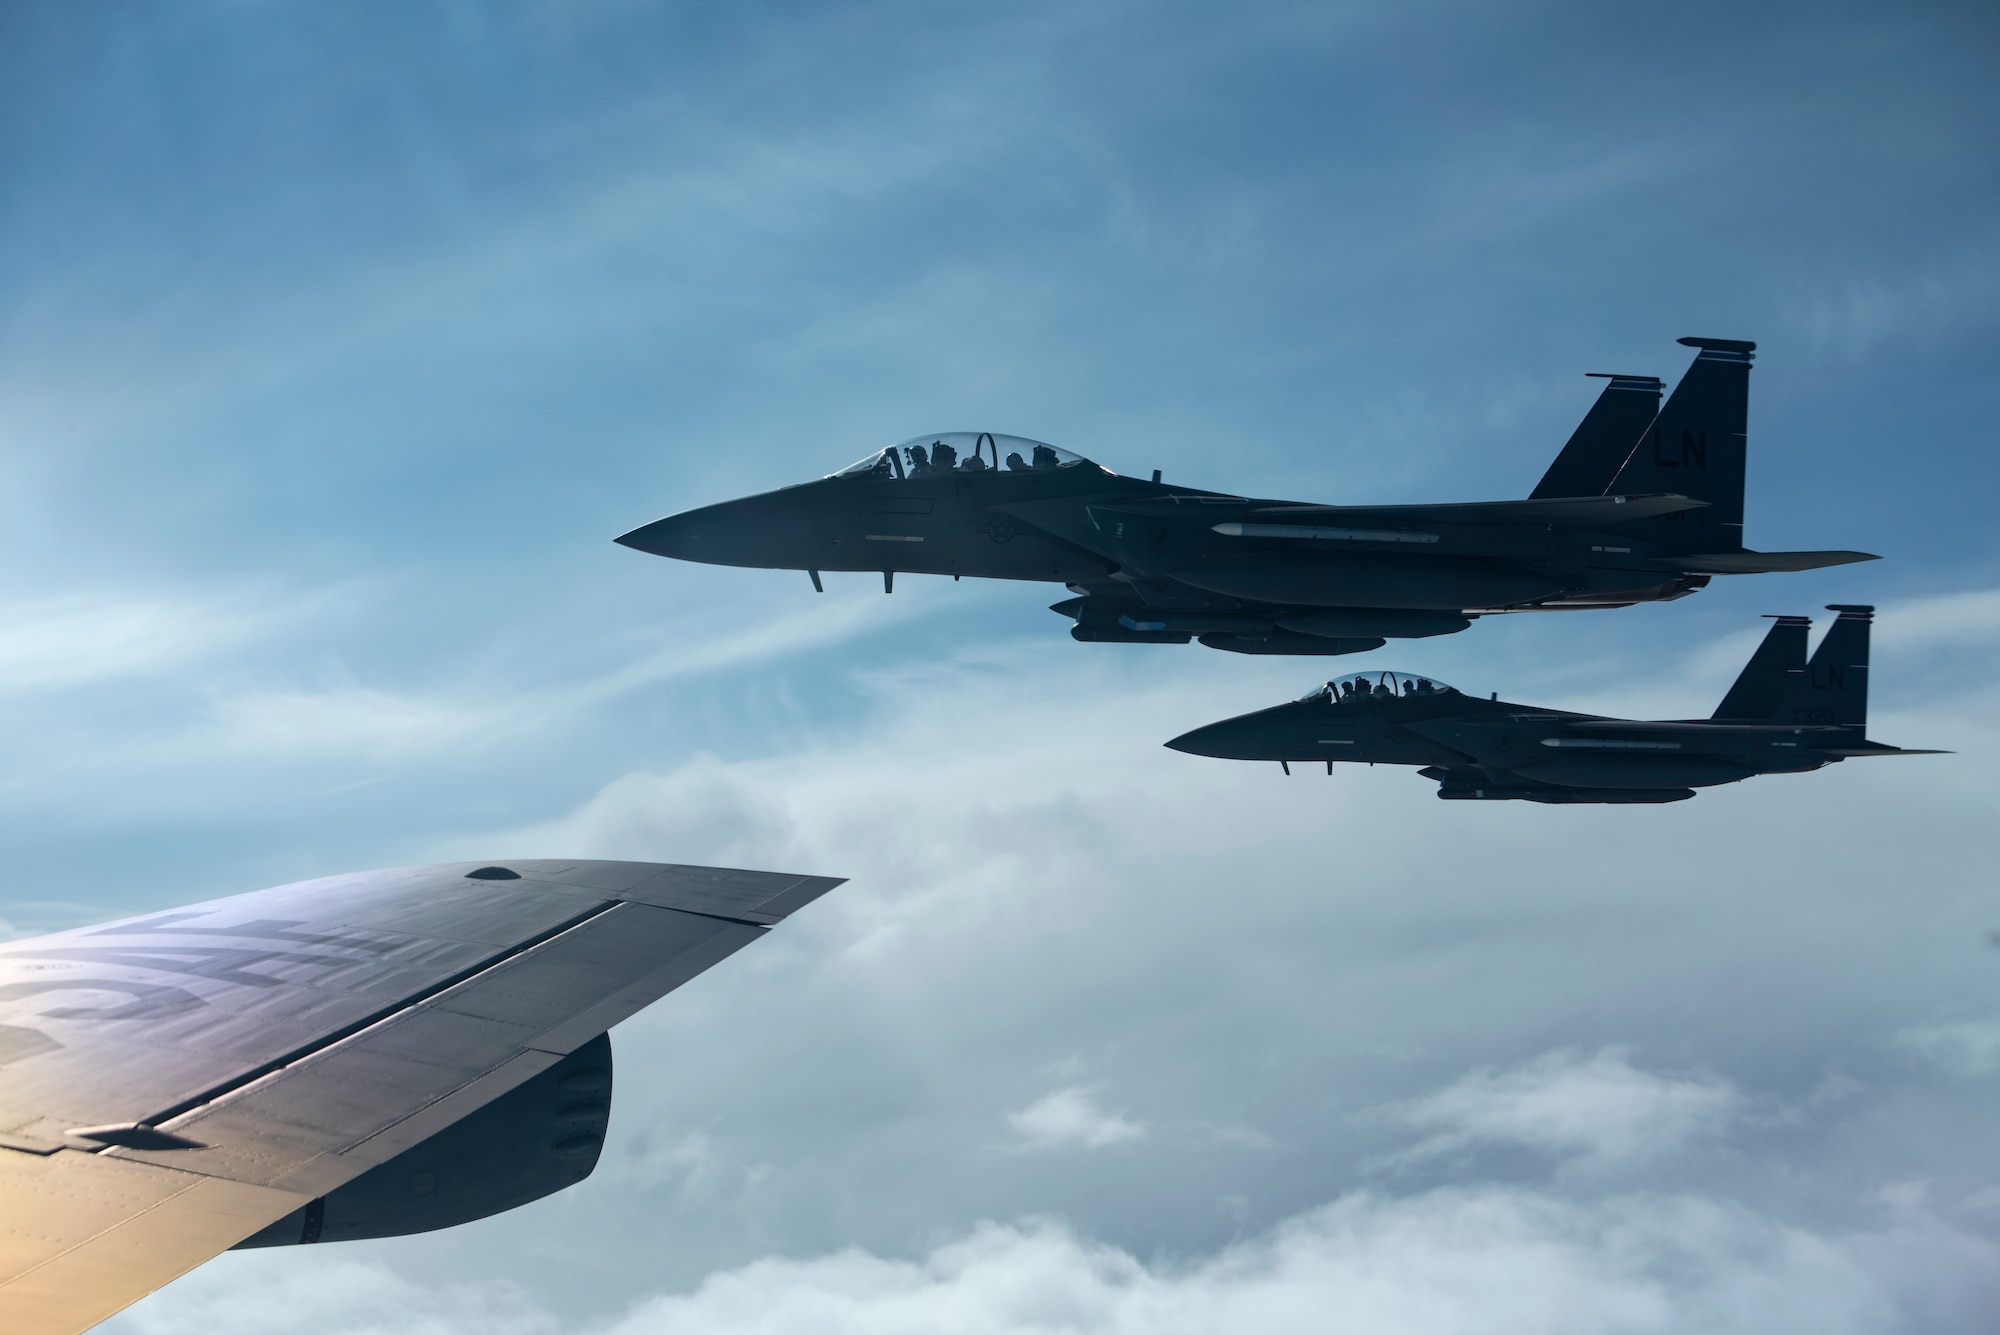 F-15E Strike Eagles assigned to the 492nd Fighter Squadron fly beside a KC-135 Stratotanker assigned to the 100th Air Refueling Wing on the way to Amari Air Base, Estonia, in support of Exercise Baltic Trident, March 15, 2021. Incorporating Agile Combat Employment concepts into exercises like Baltic Trident increases lethality and enhances interoperability with NATO allies and partner nations, ensuring the ability to counter military aggression and coercion by sharing responsibilities for common defense. (U.S. Air Force photo by Airman 1st Class Jessi Monte)